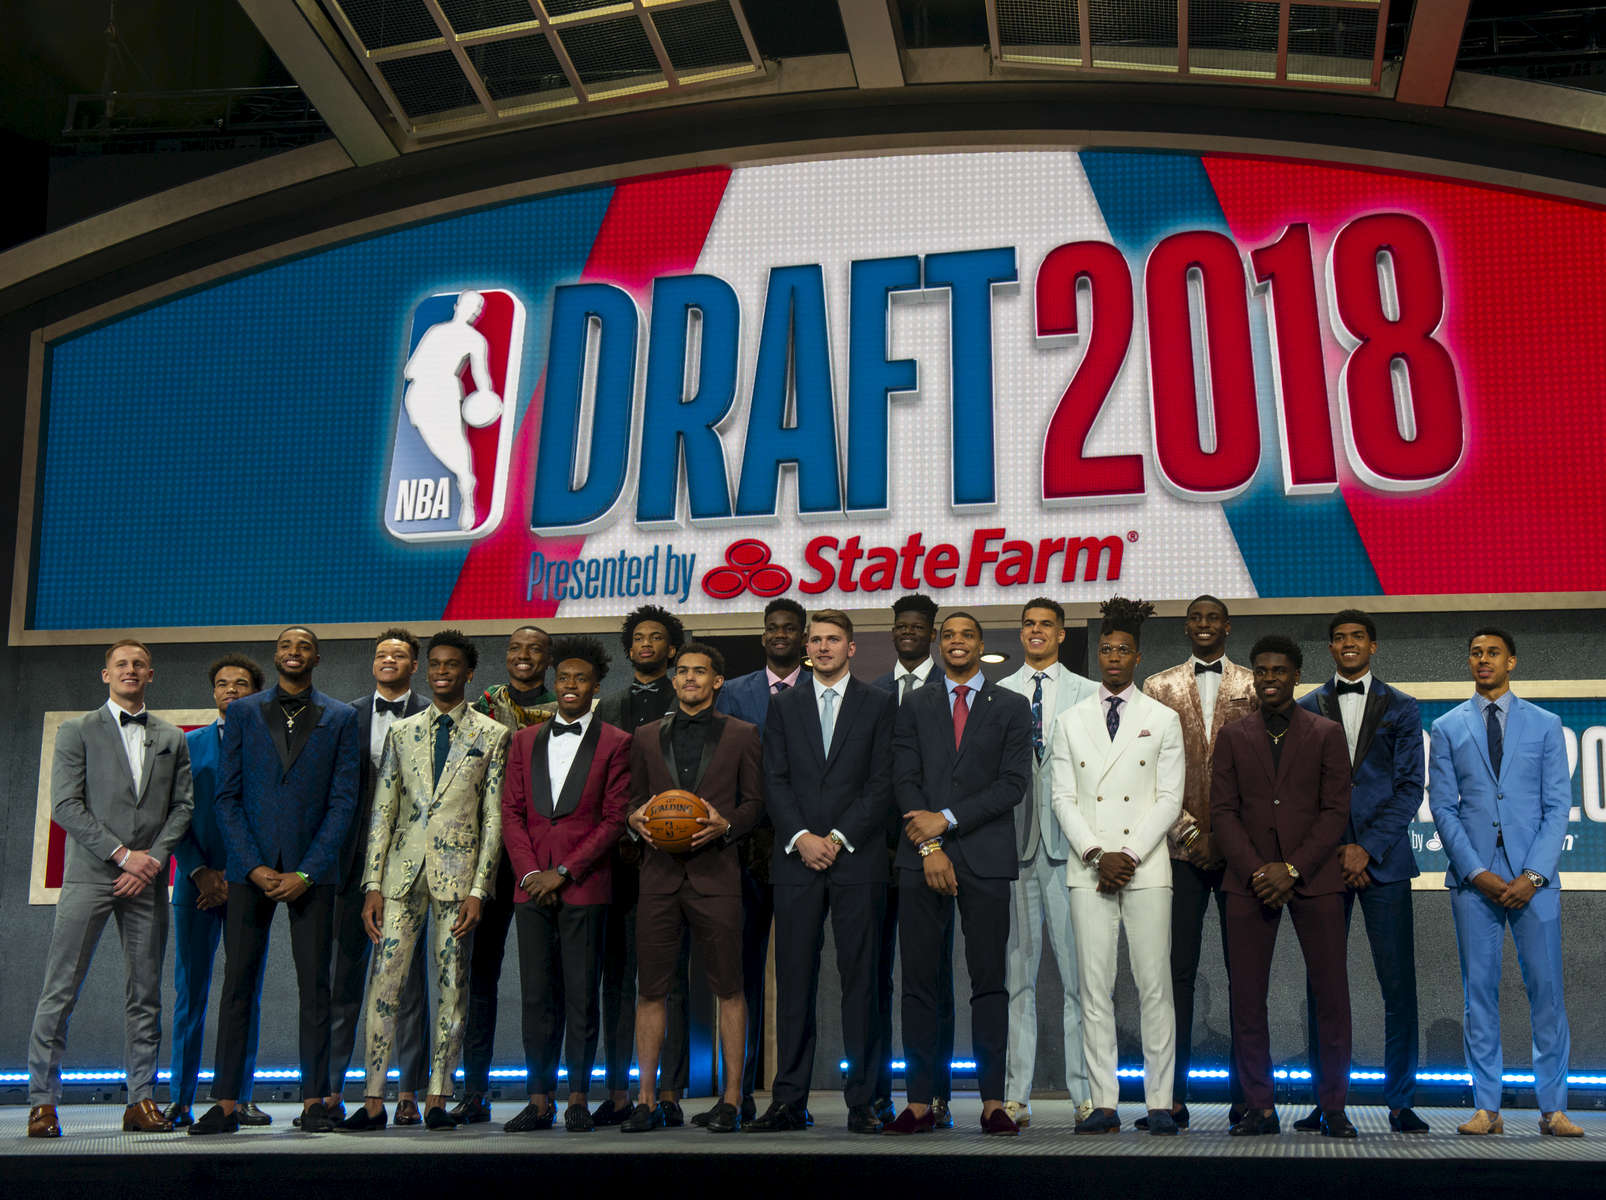 First round draft pick players pose for photos at the 2018 NBA Draft held in Barclays Center located at 620 Atlantic Avenue in Brooklyn, New York on Thursday, June 21, 2018.